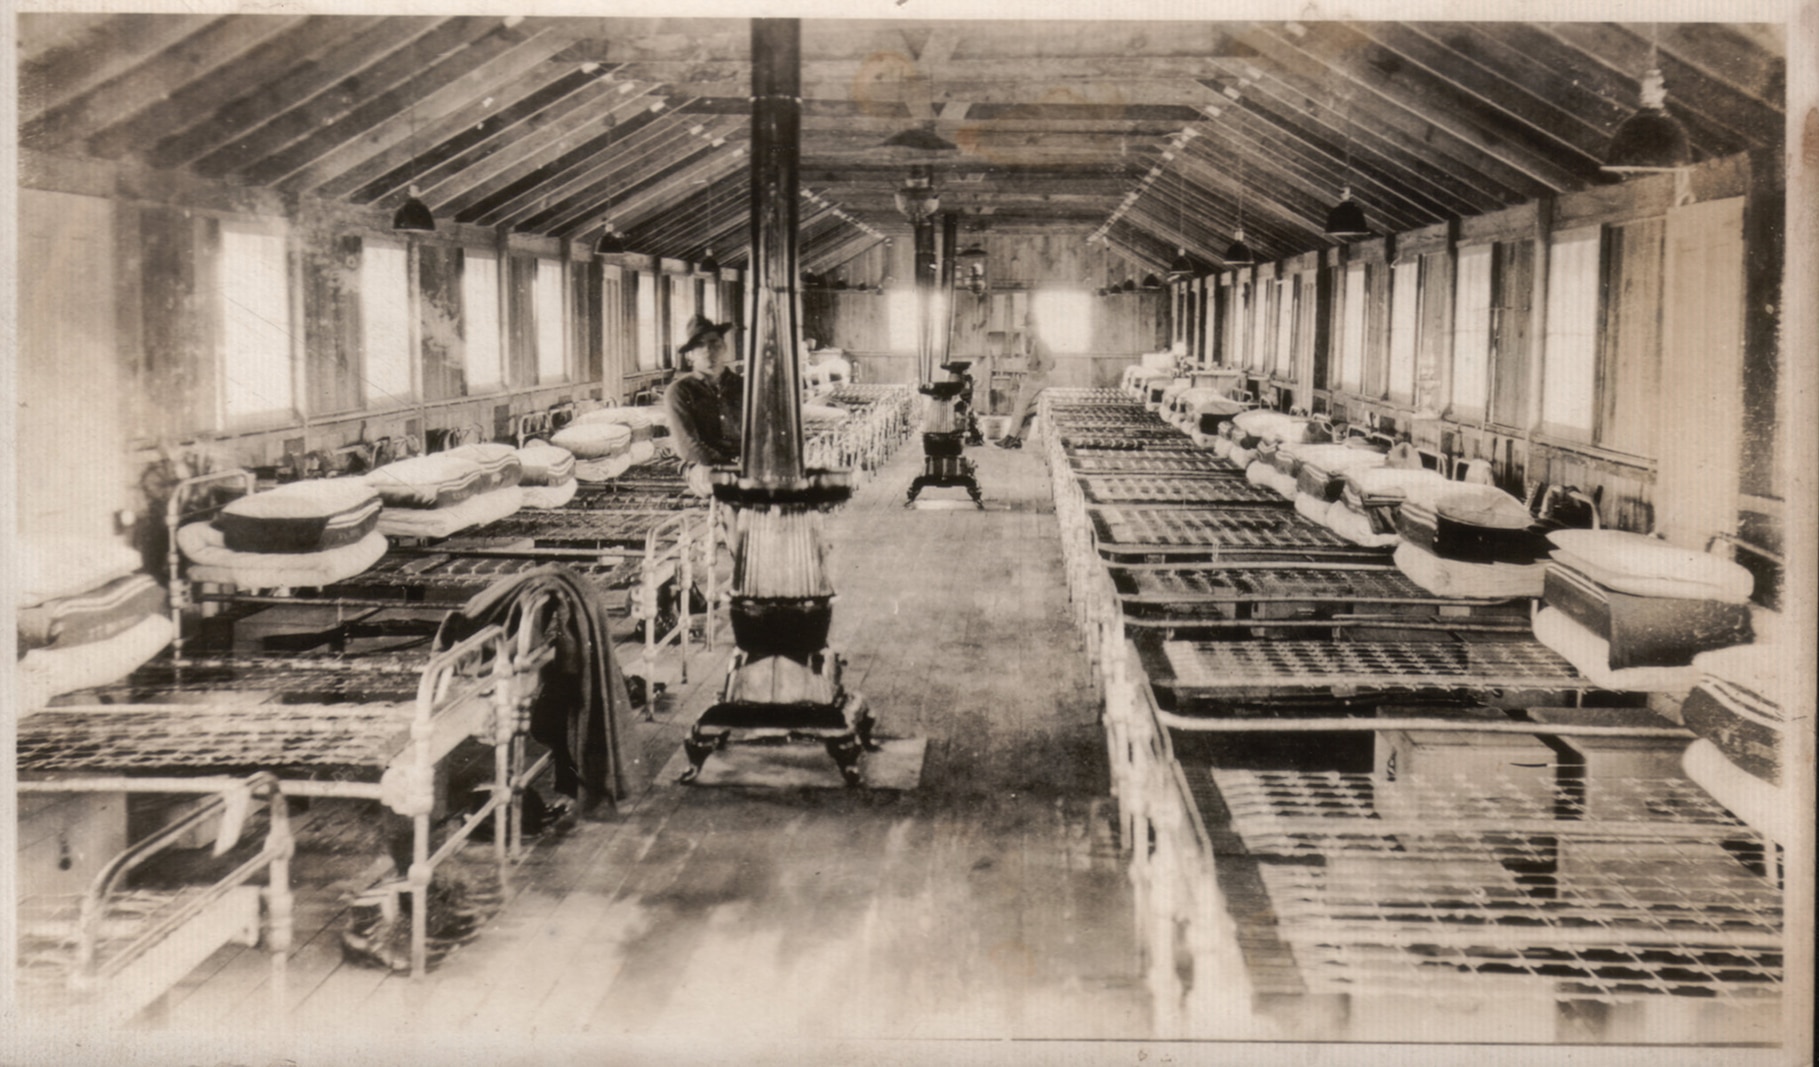 During World War I, approximately 500 temporary barracks that could 10,000 recruits were constructed on what is today the North side of the parade deck in what was then known as the East and West Wings. 